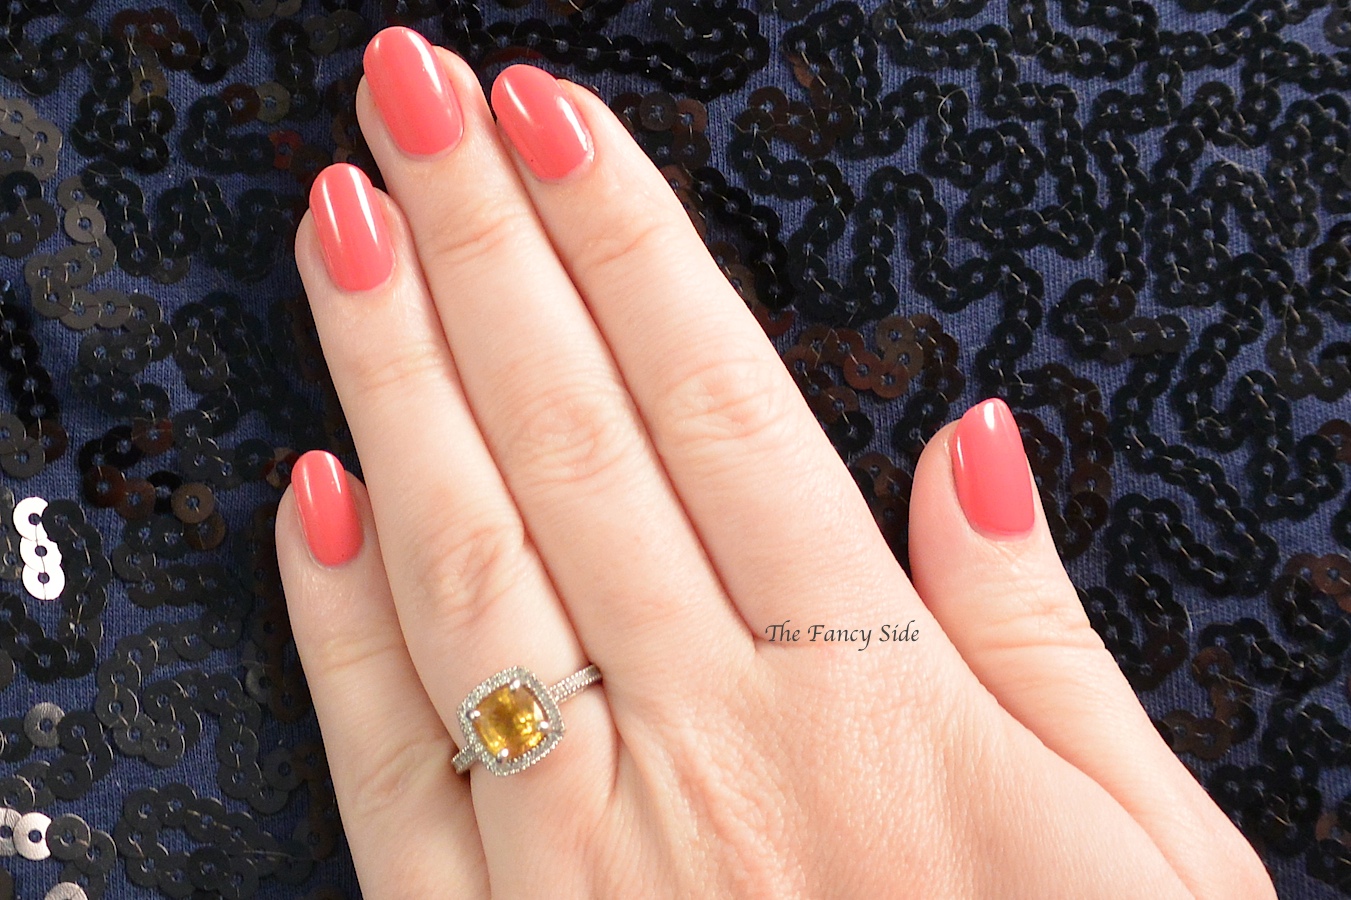 The Fancy Side: Coral nails featuring KBShimmer